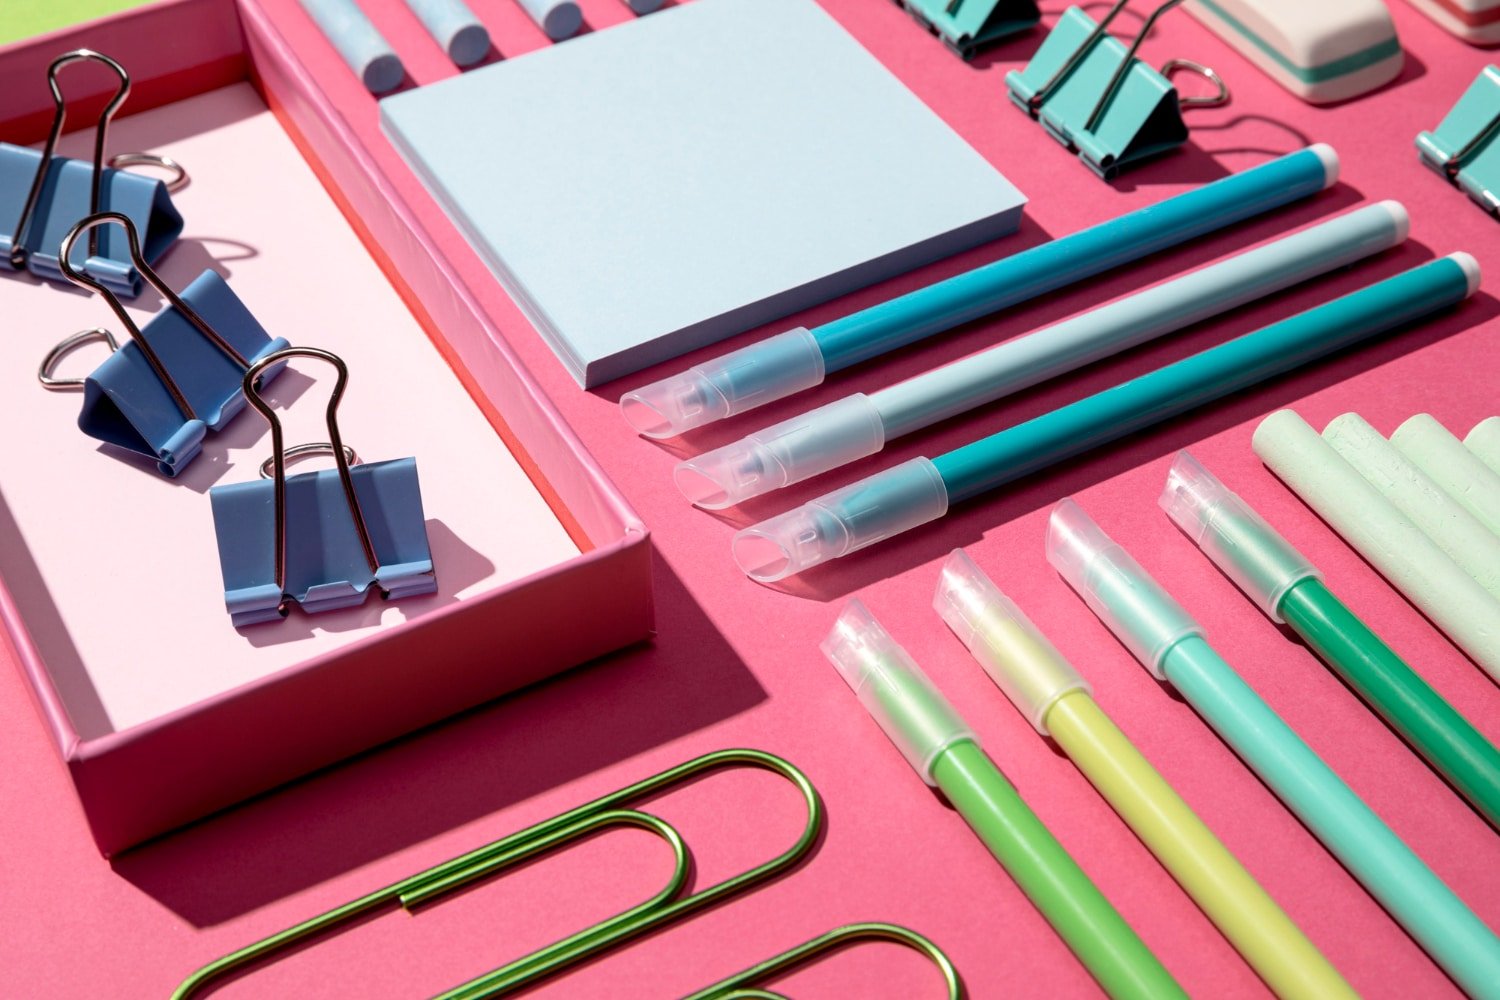 Discover Creative Stationery At Crane’s Fine Stationery Store